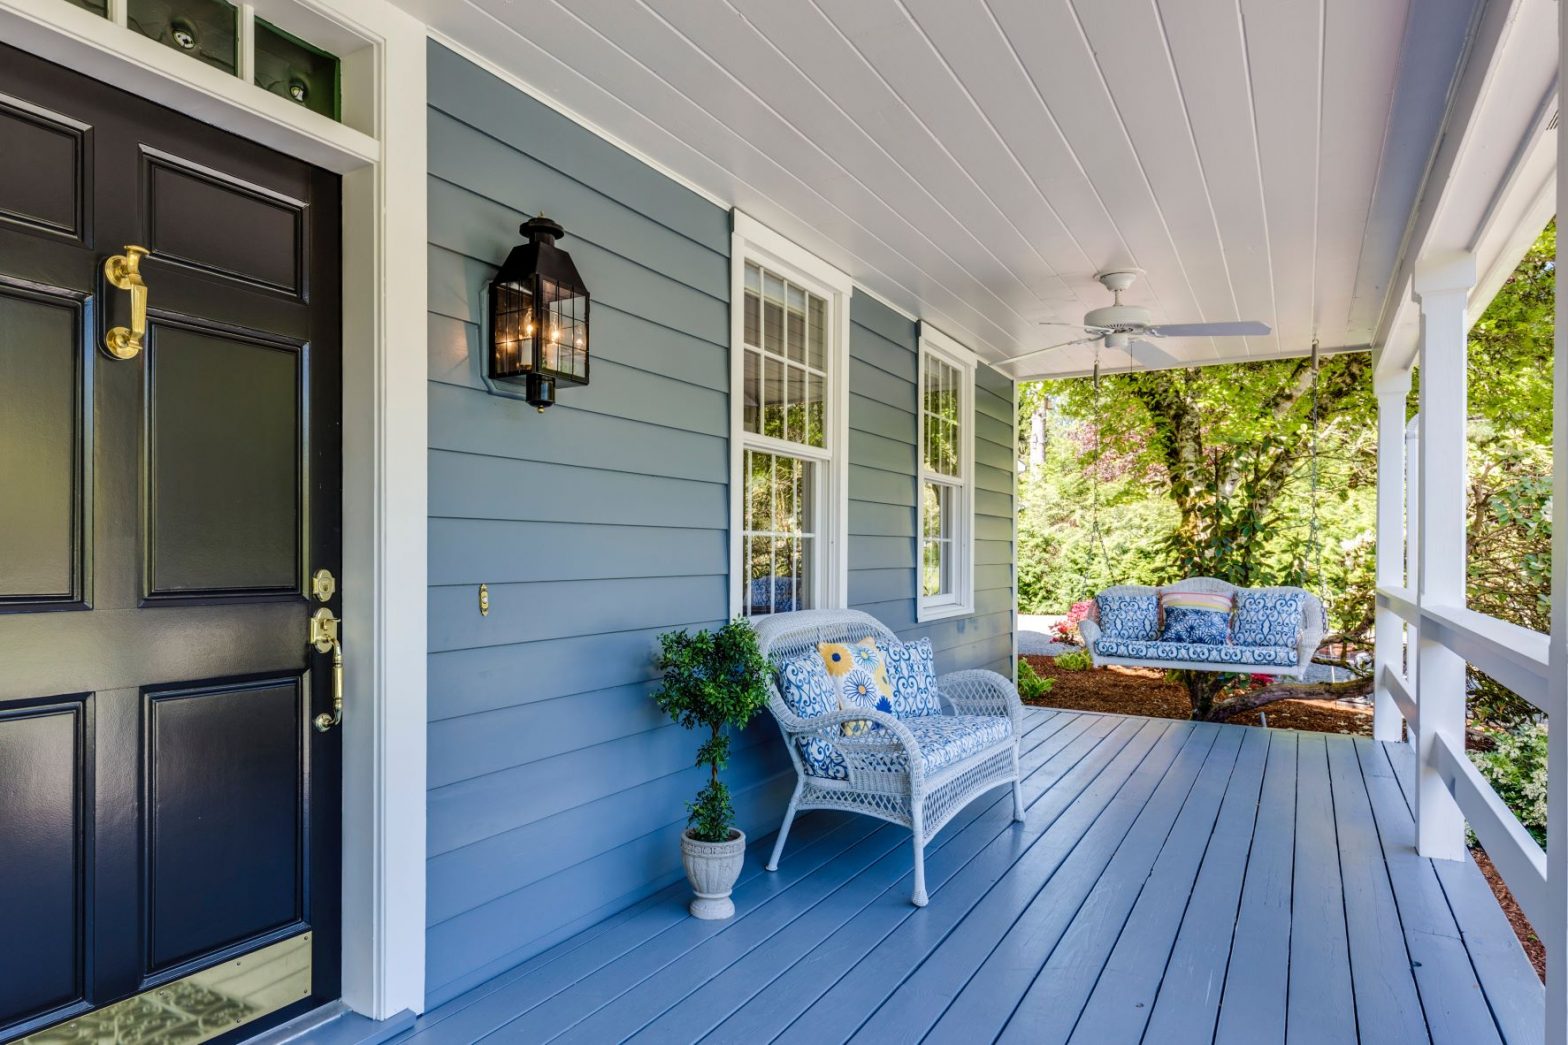 8 Renovation Ideas to Modernize the Look of Your Home’s Exterior